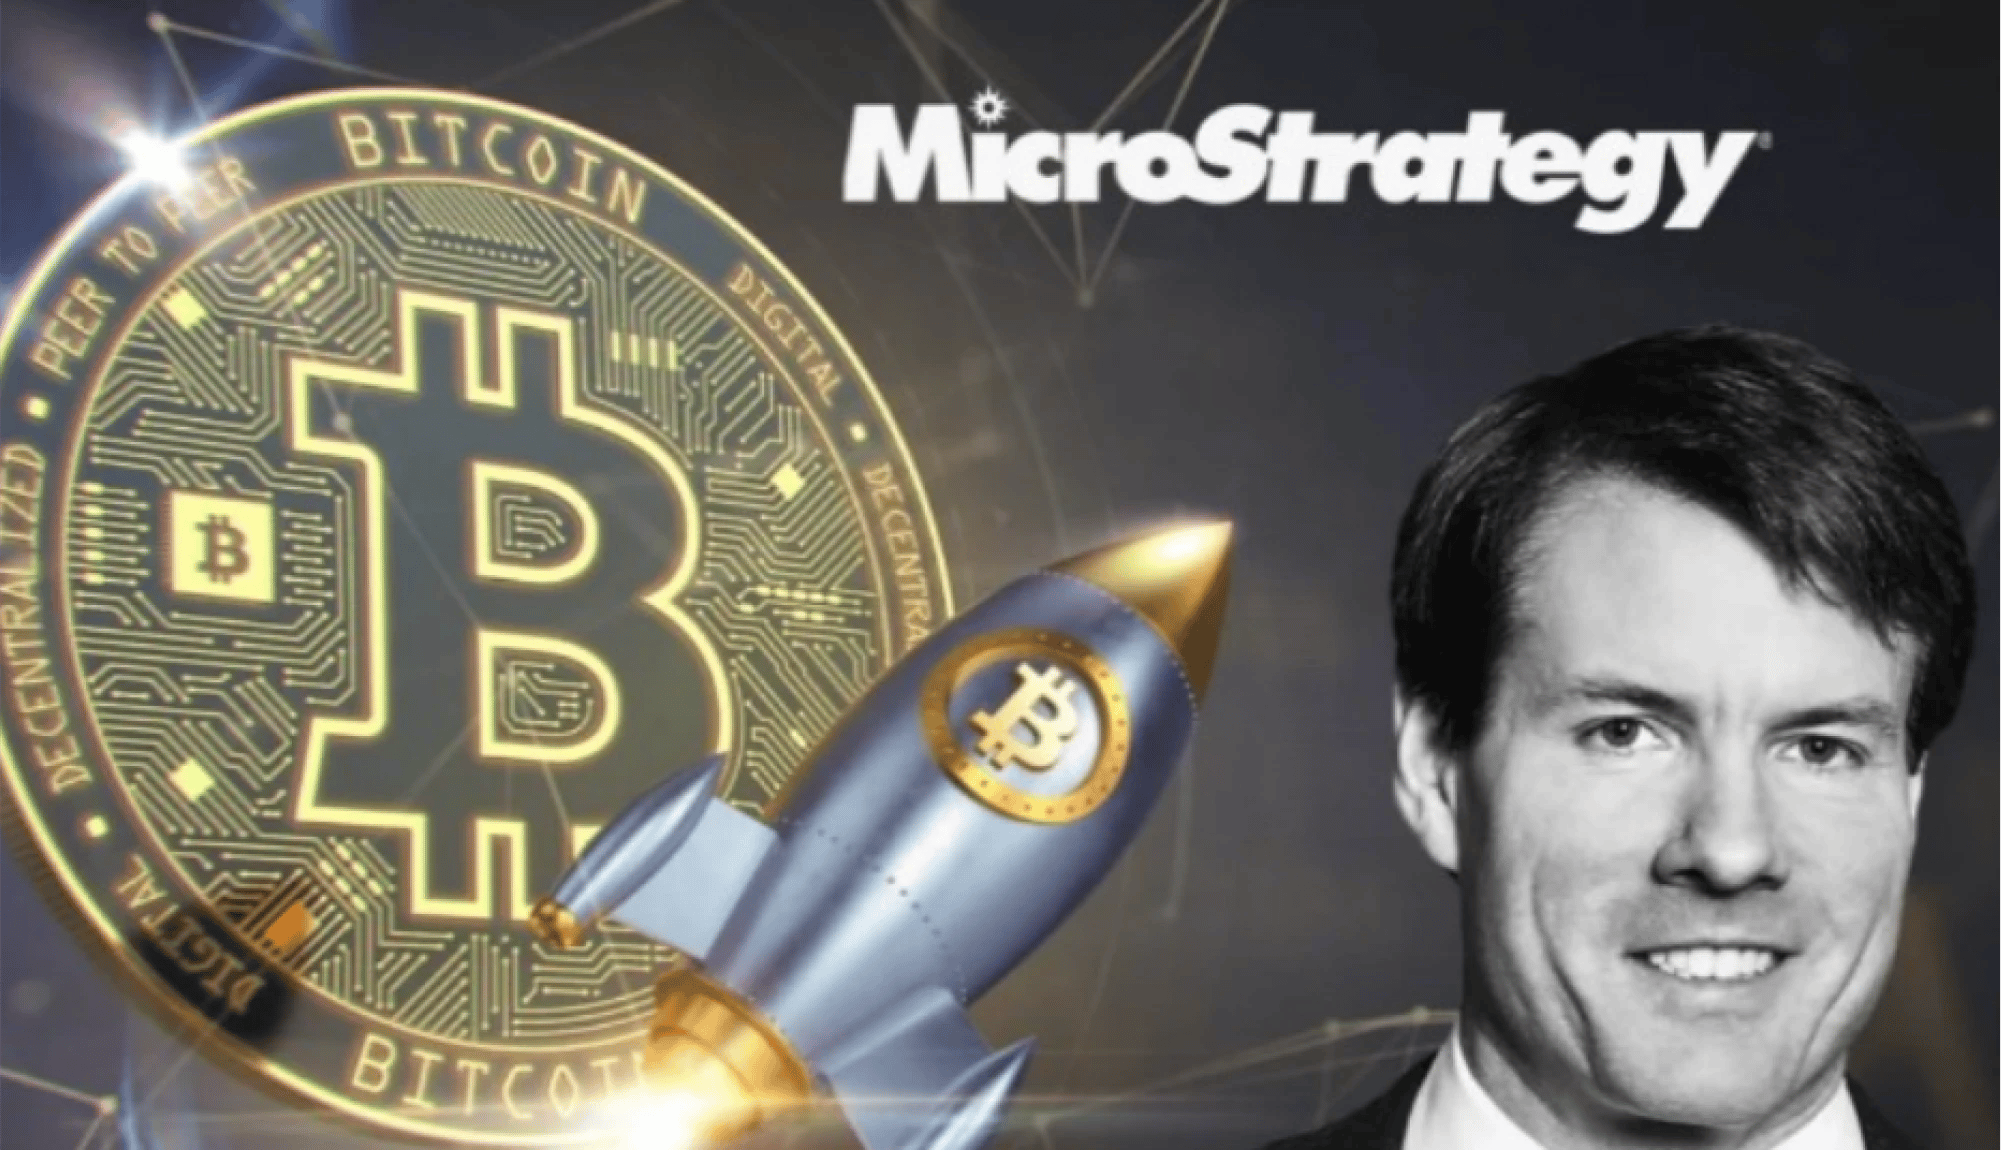 MicroStrategy's Bullish Stance: Saylor's Plan to Boost Bitcoin Investments